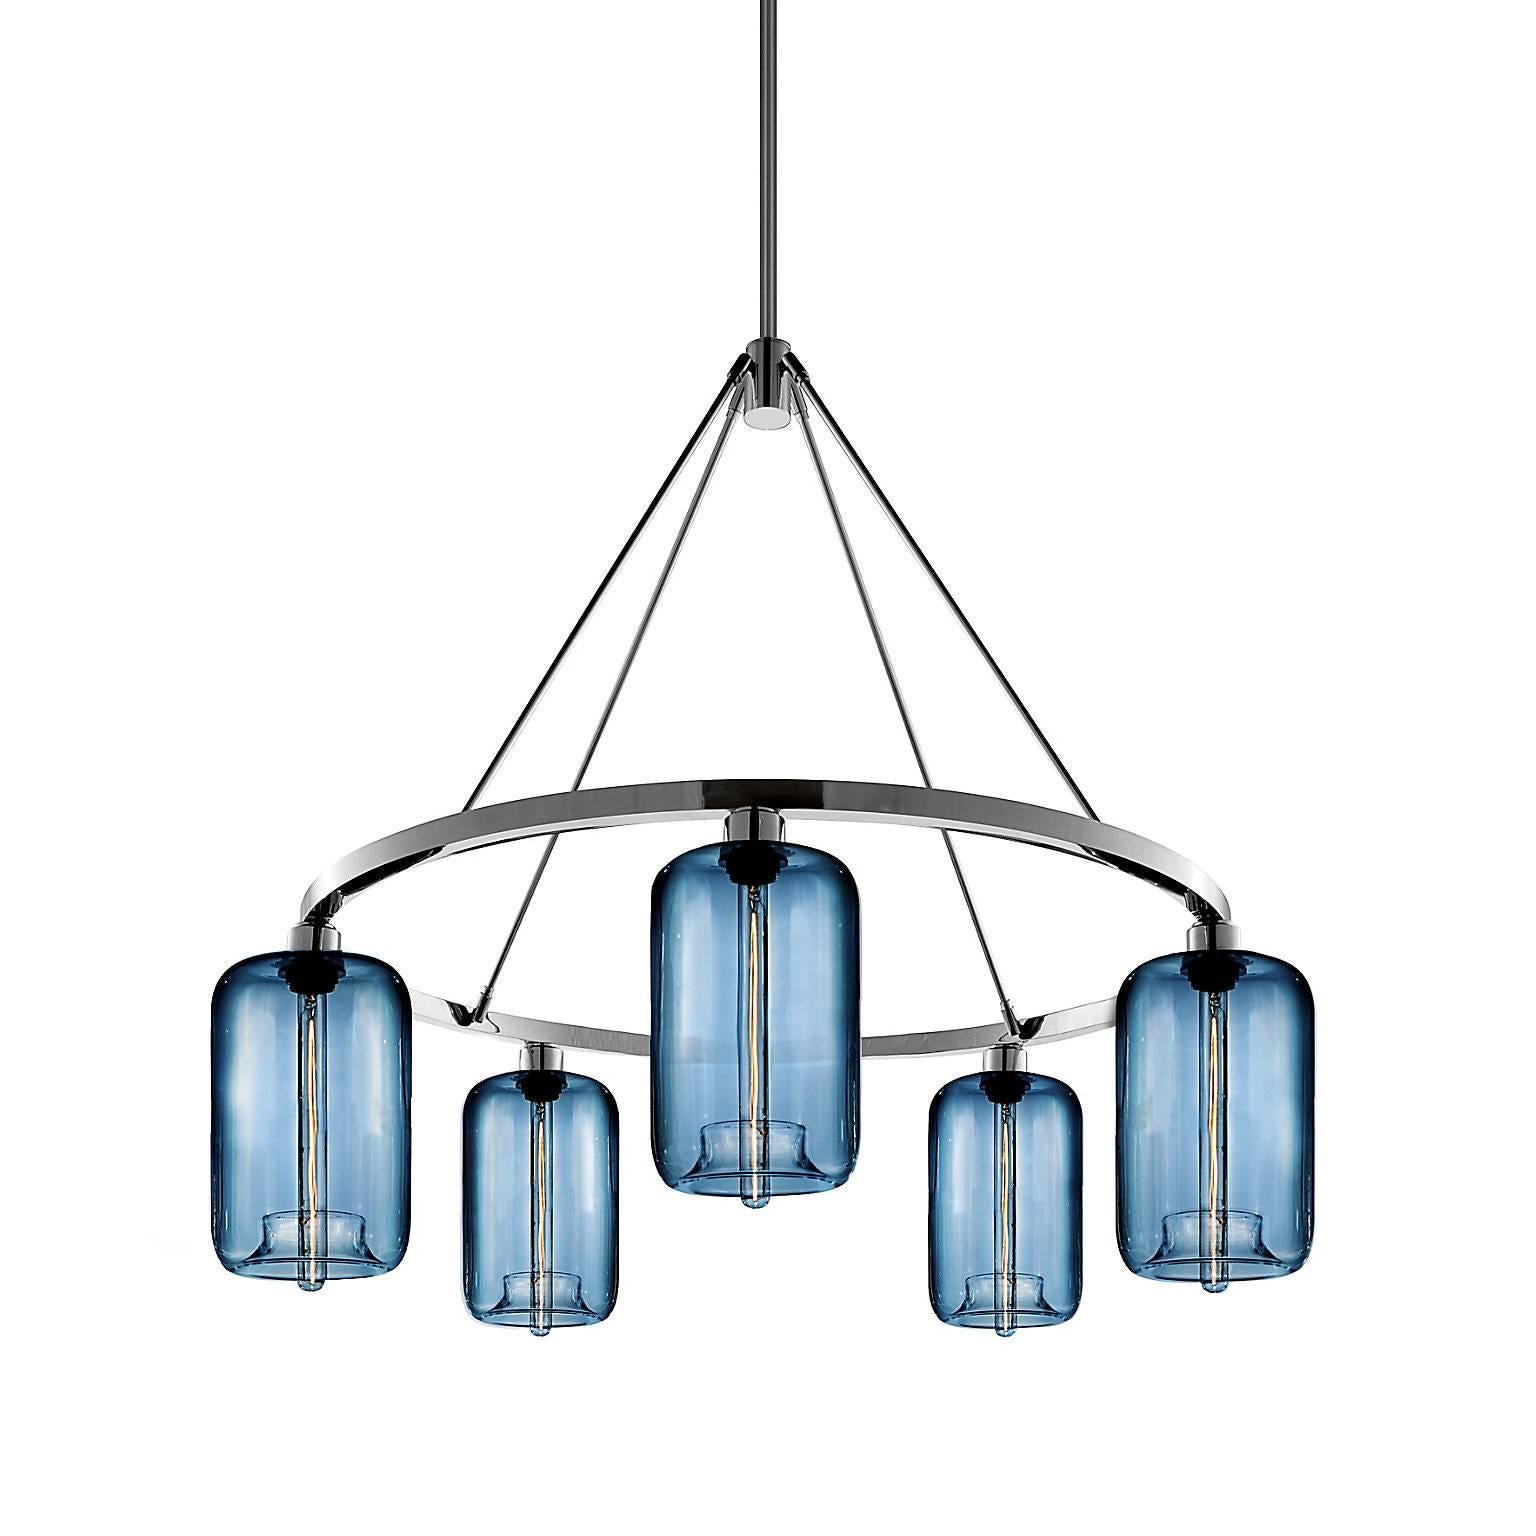 A statement piece designed to attract attention to the brilliant pod pendant, this chandelier captivates as it suspends elegant handblown shades. Every single glass light that comes from Niche is handblown by real human beings in a state-of-the-art